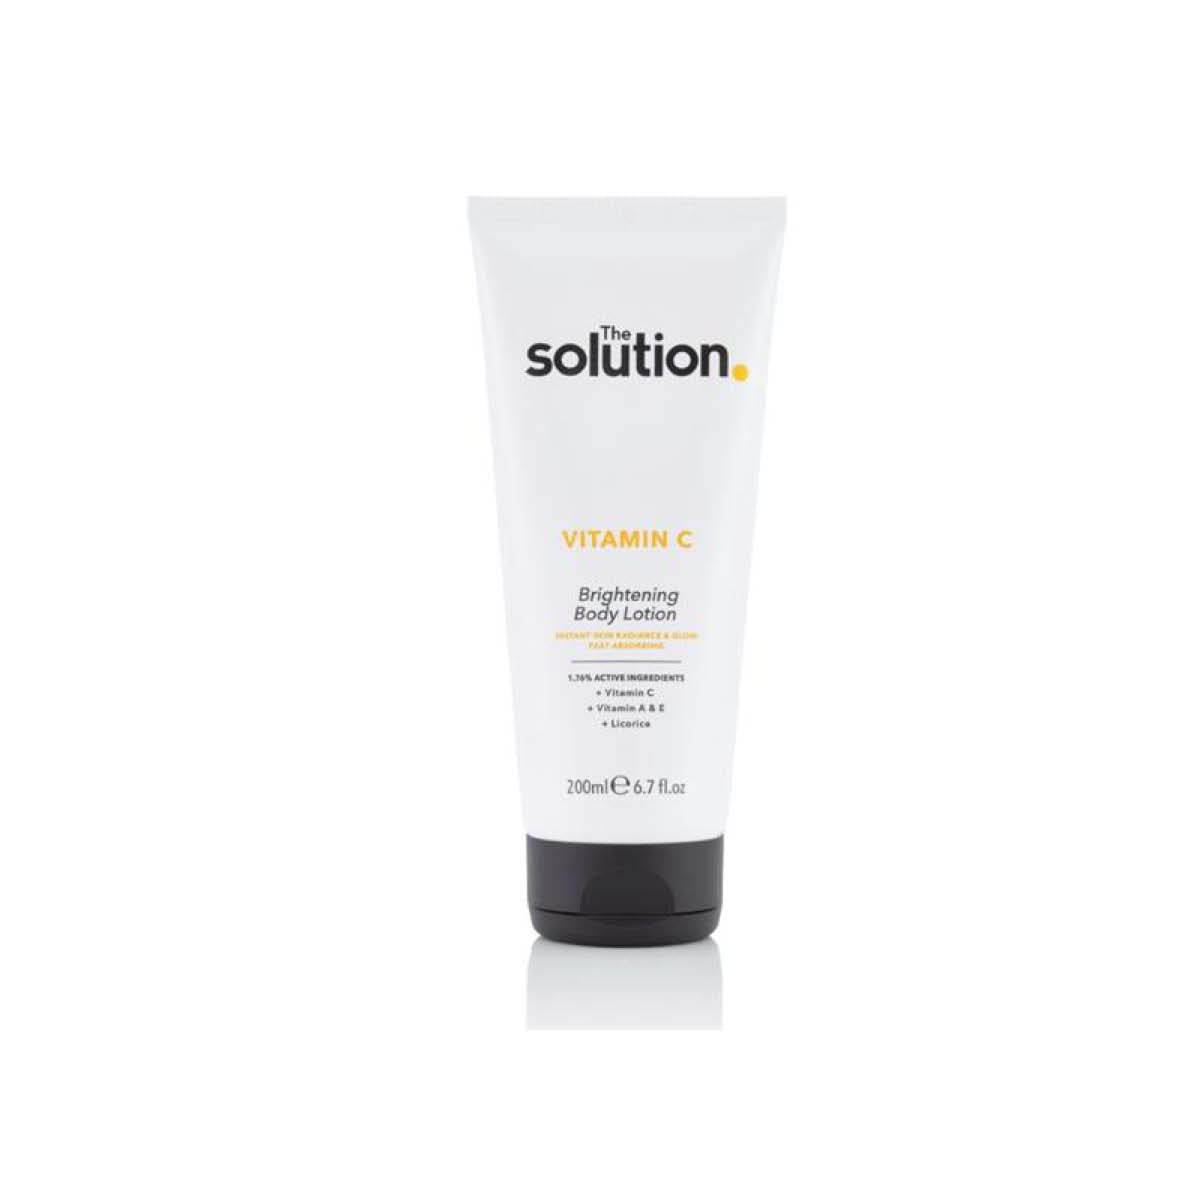 The Solution Vitamin C Brightening Body Lotion. 30% OFF